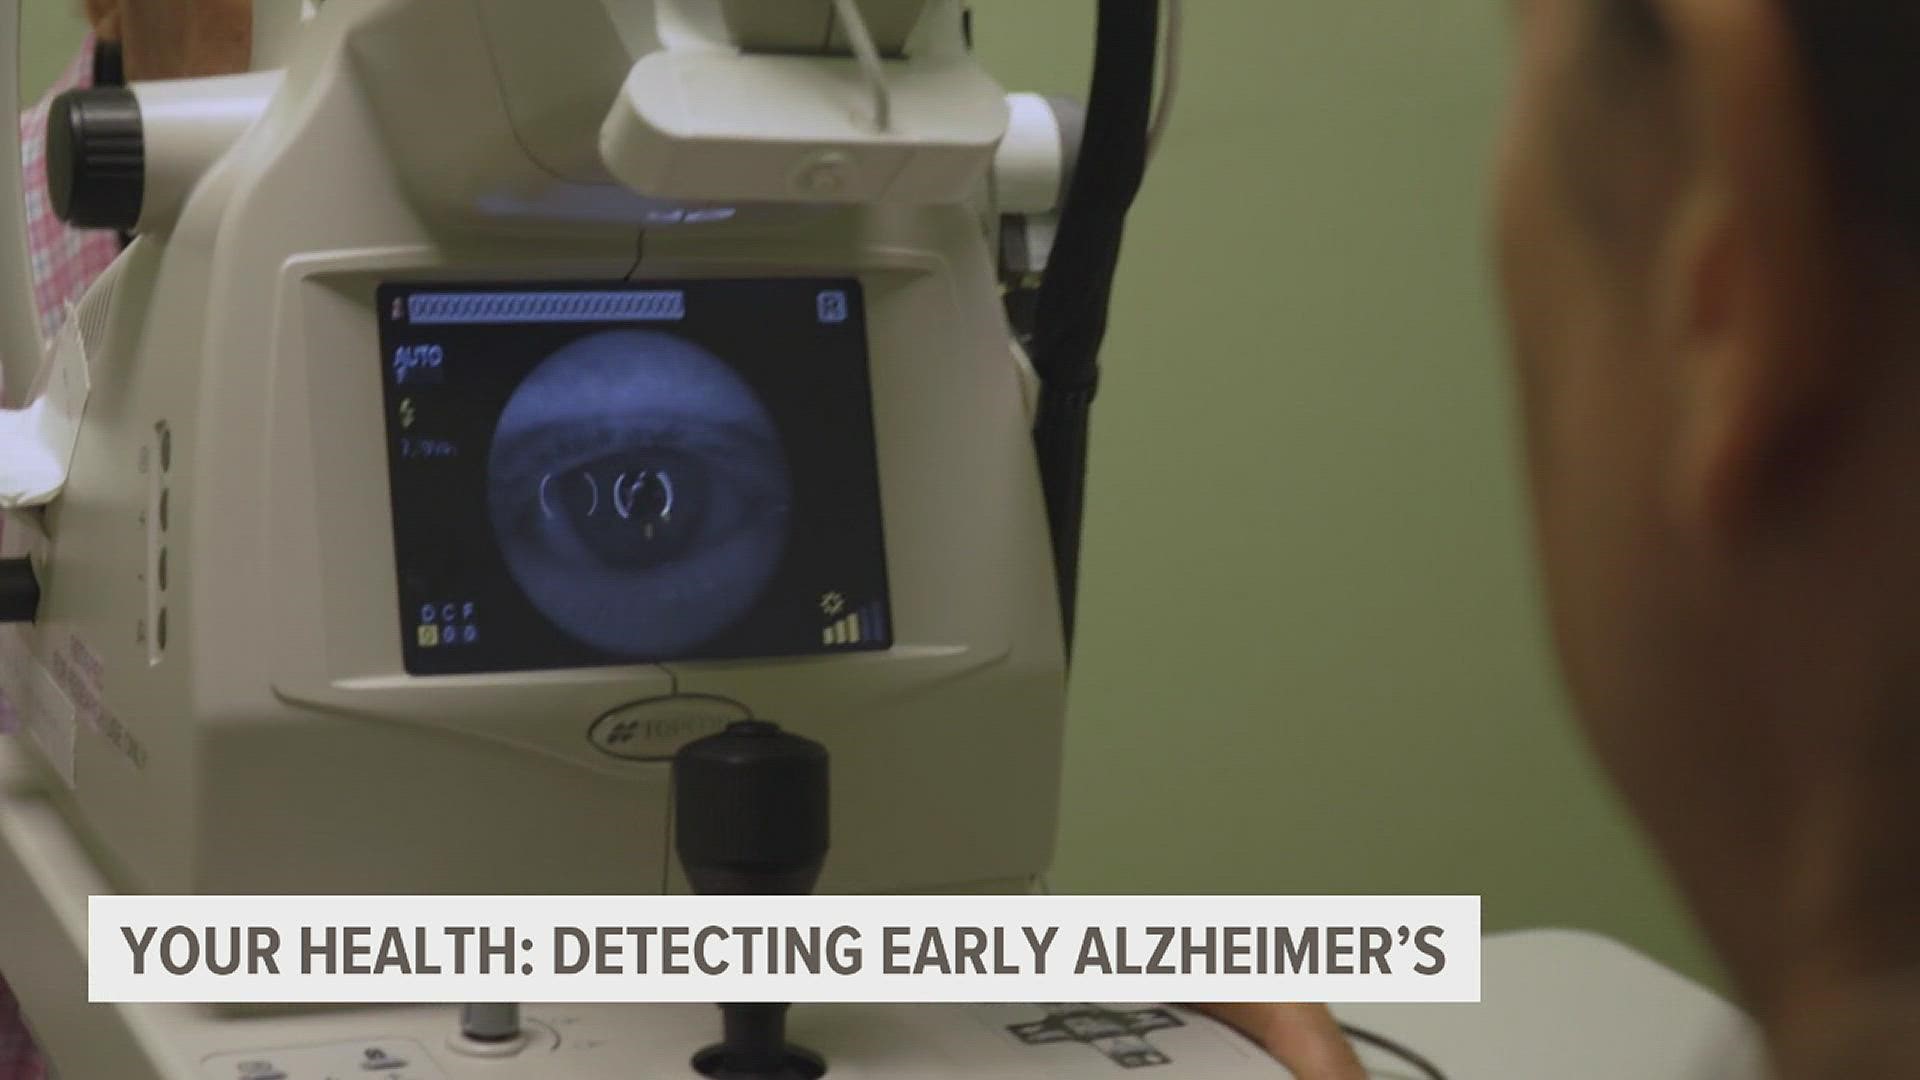 Researchers are testing a new device that may make it easier to detect and diagnose Alzheimer's disease early.